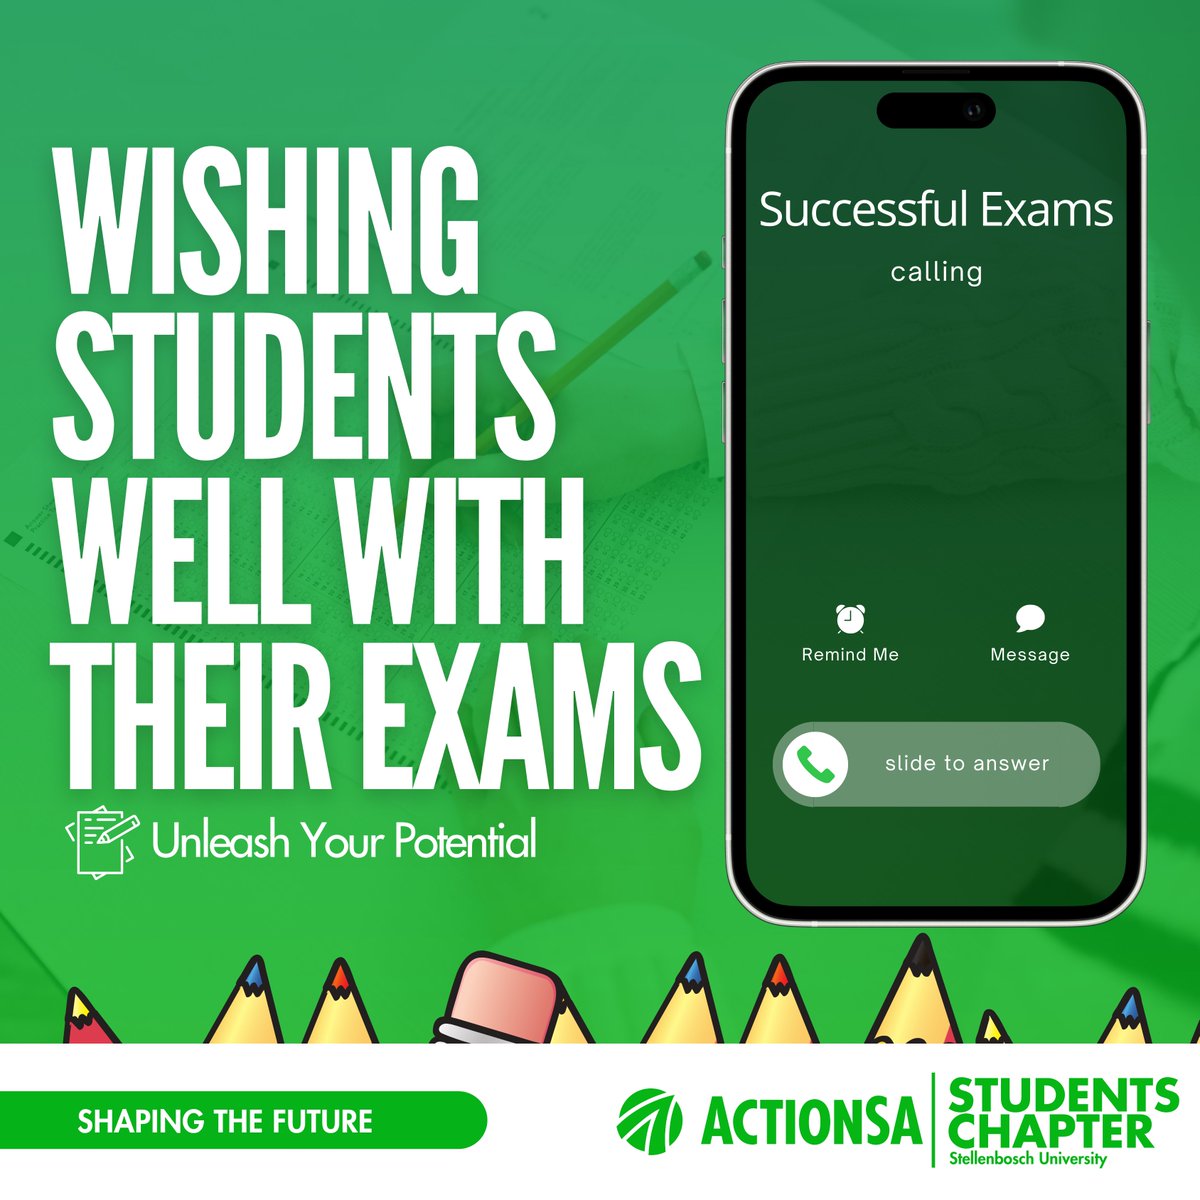 ActionSA SU wishes all students a successful exam season 💚 #ShapingOurFuture